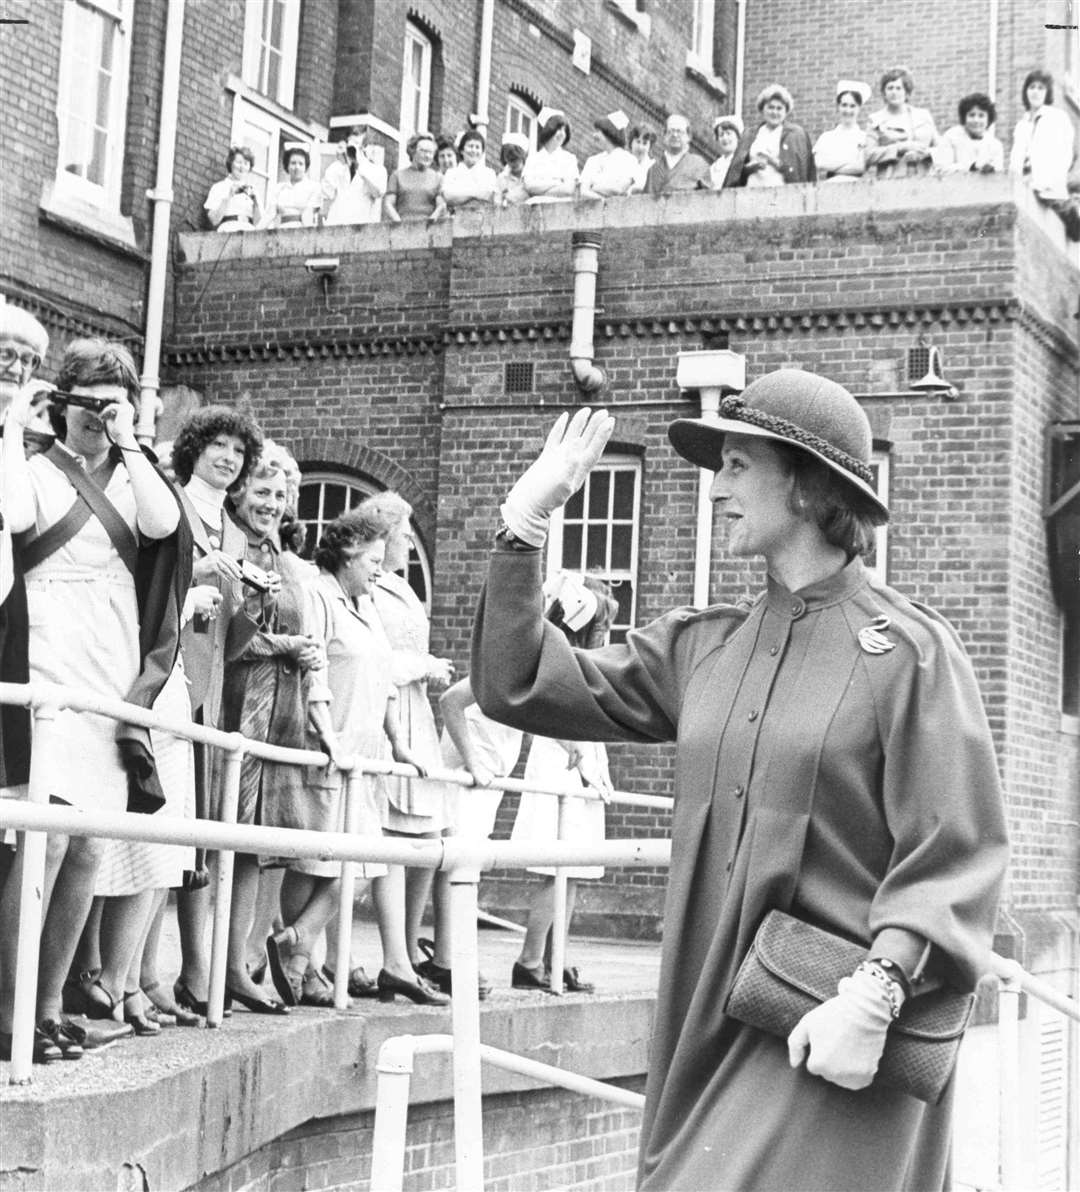 May 1978: A smiling Princess Alexandra waved to staff as she visited St Bartholomew's Hospital, Rochester